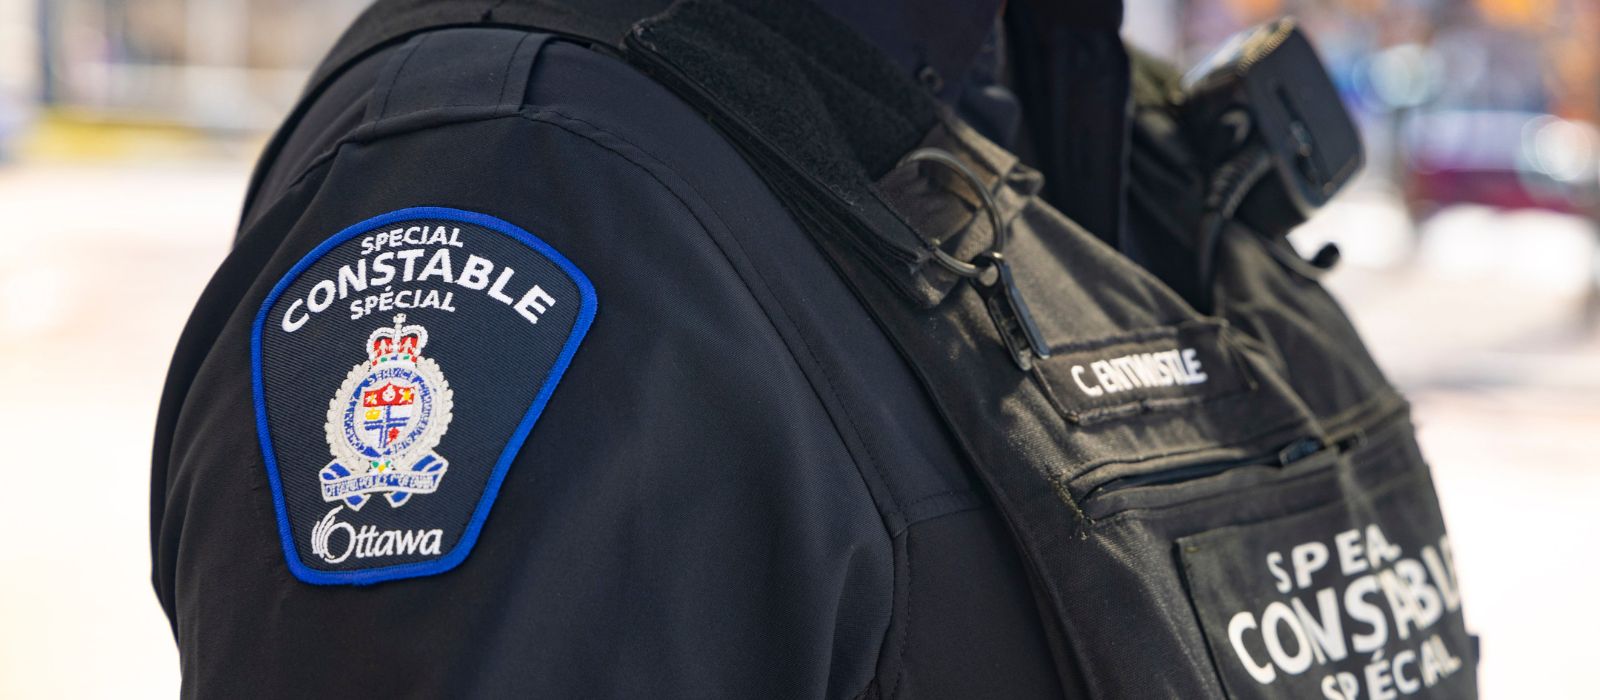 An image of an Ottawa Police Special Constable